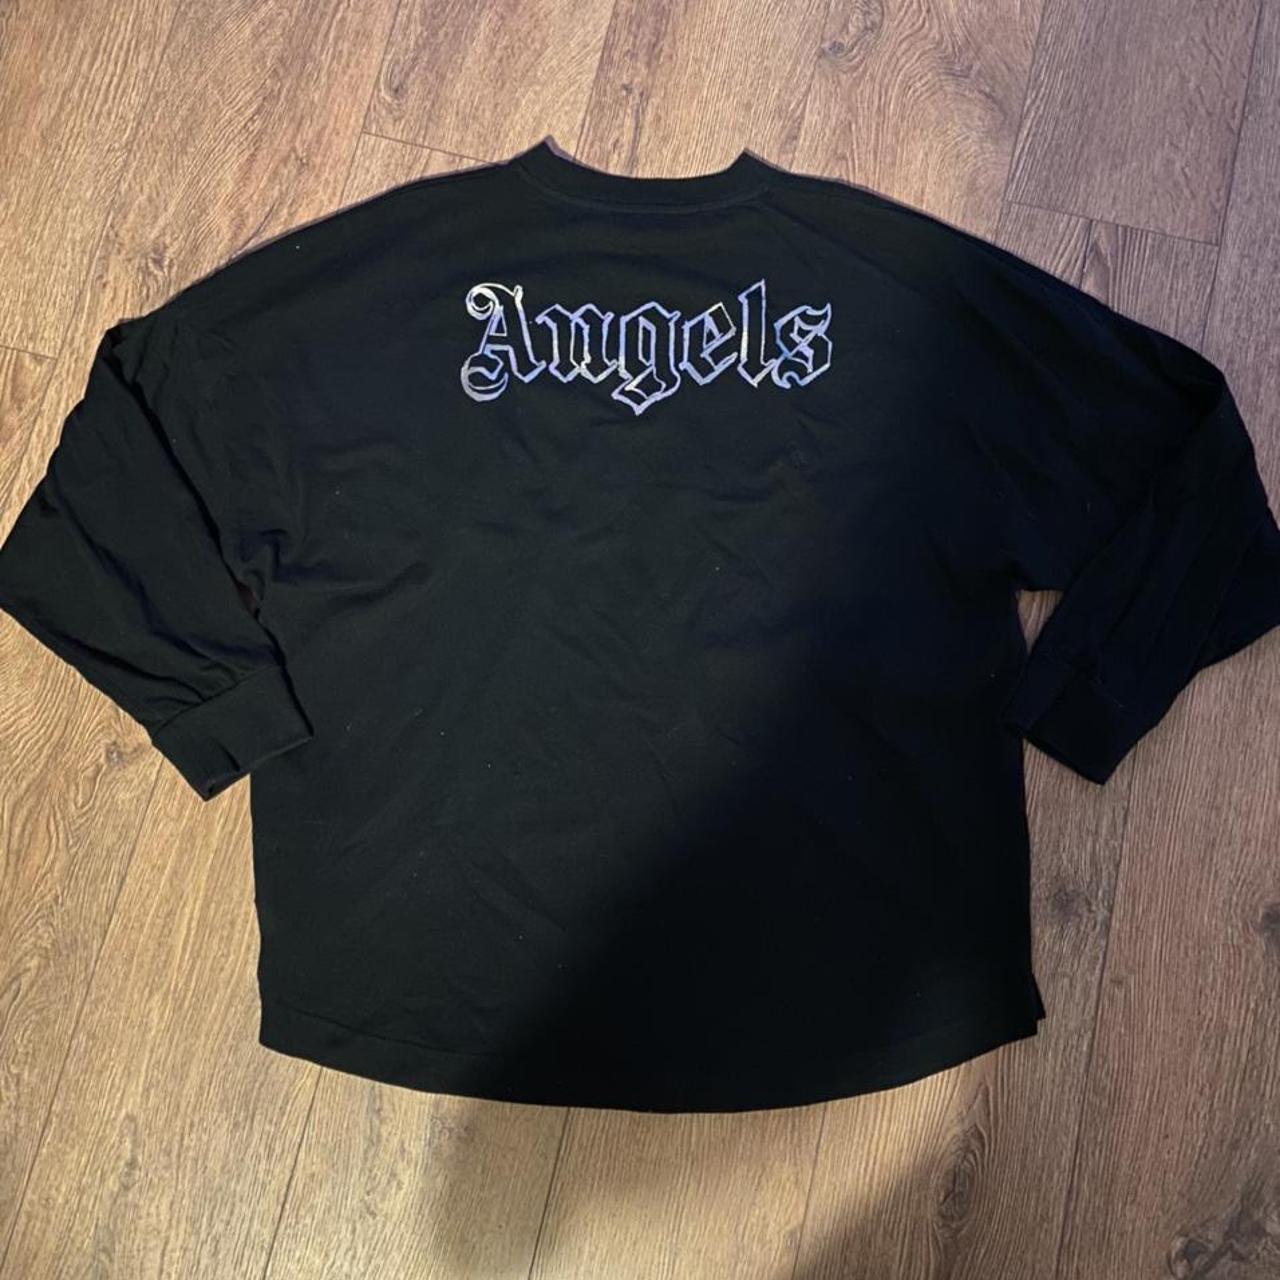 PALM ANGELS BLACK LONG SLEEVE SPELL OUT T SHIRT SIZE - Depop